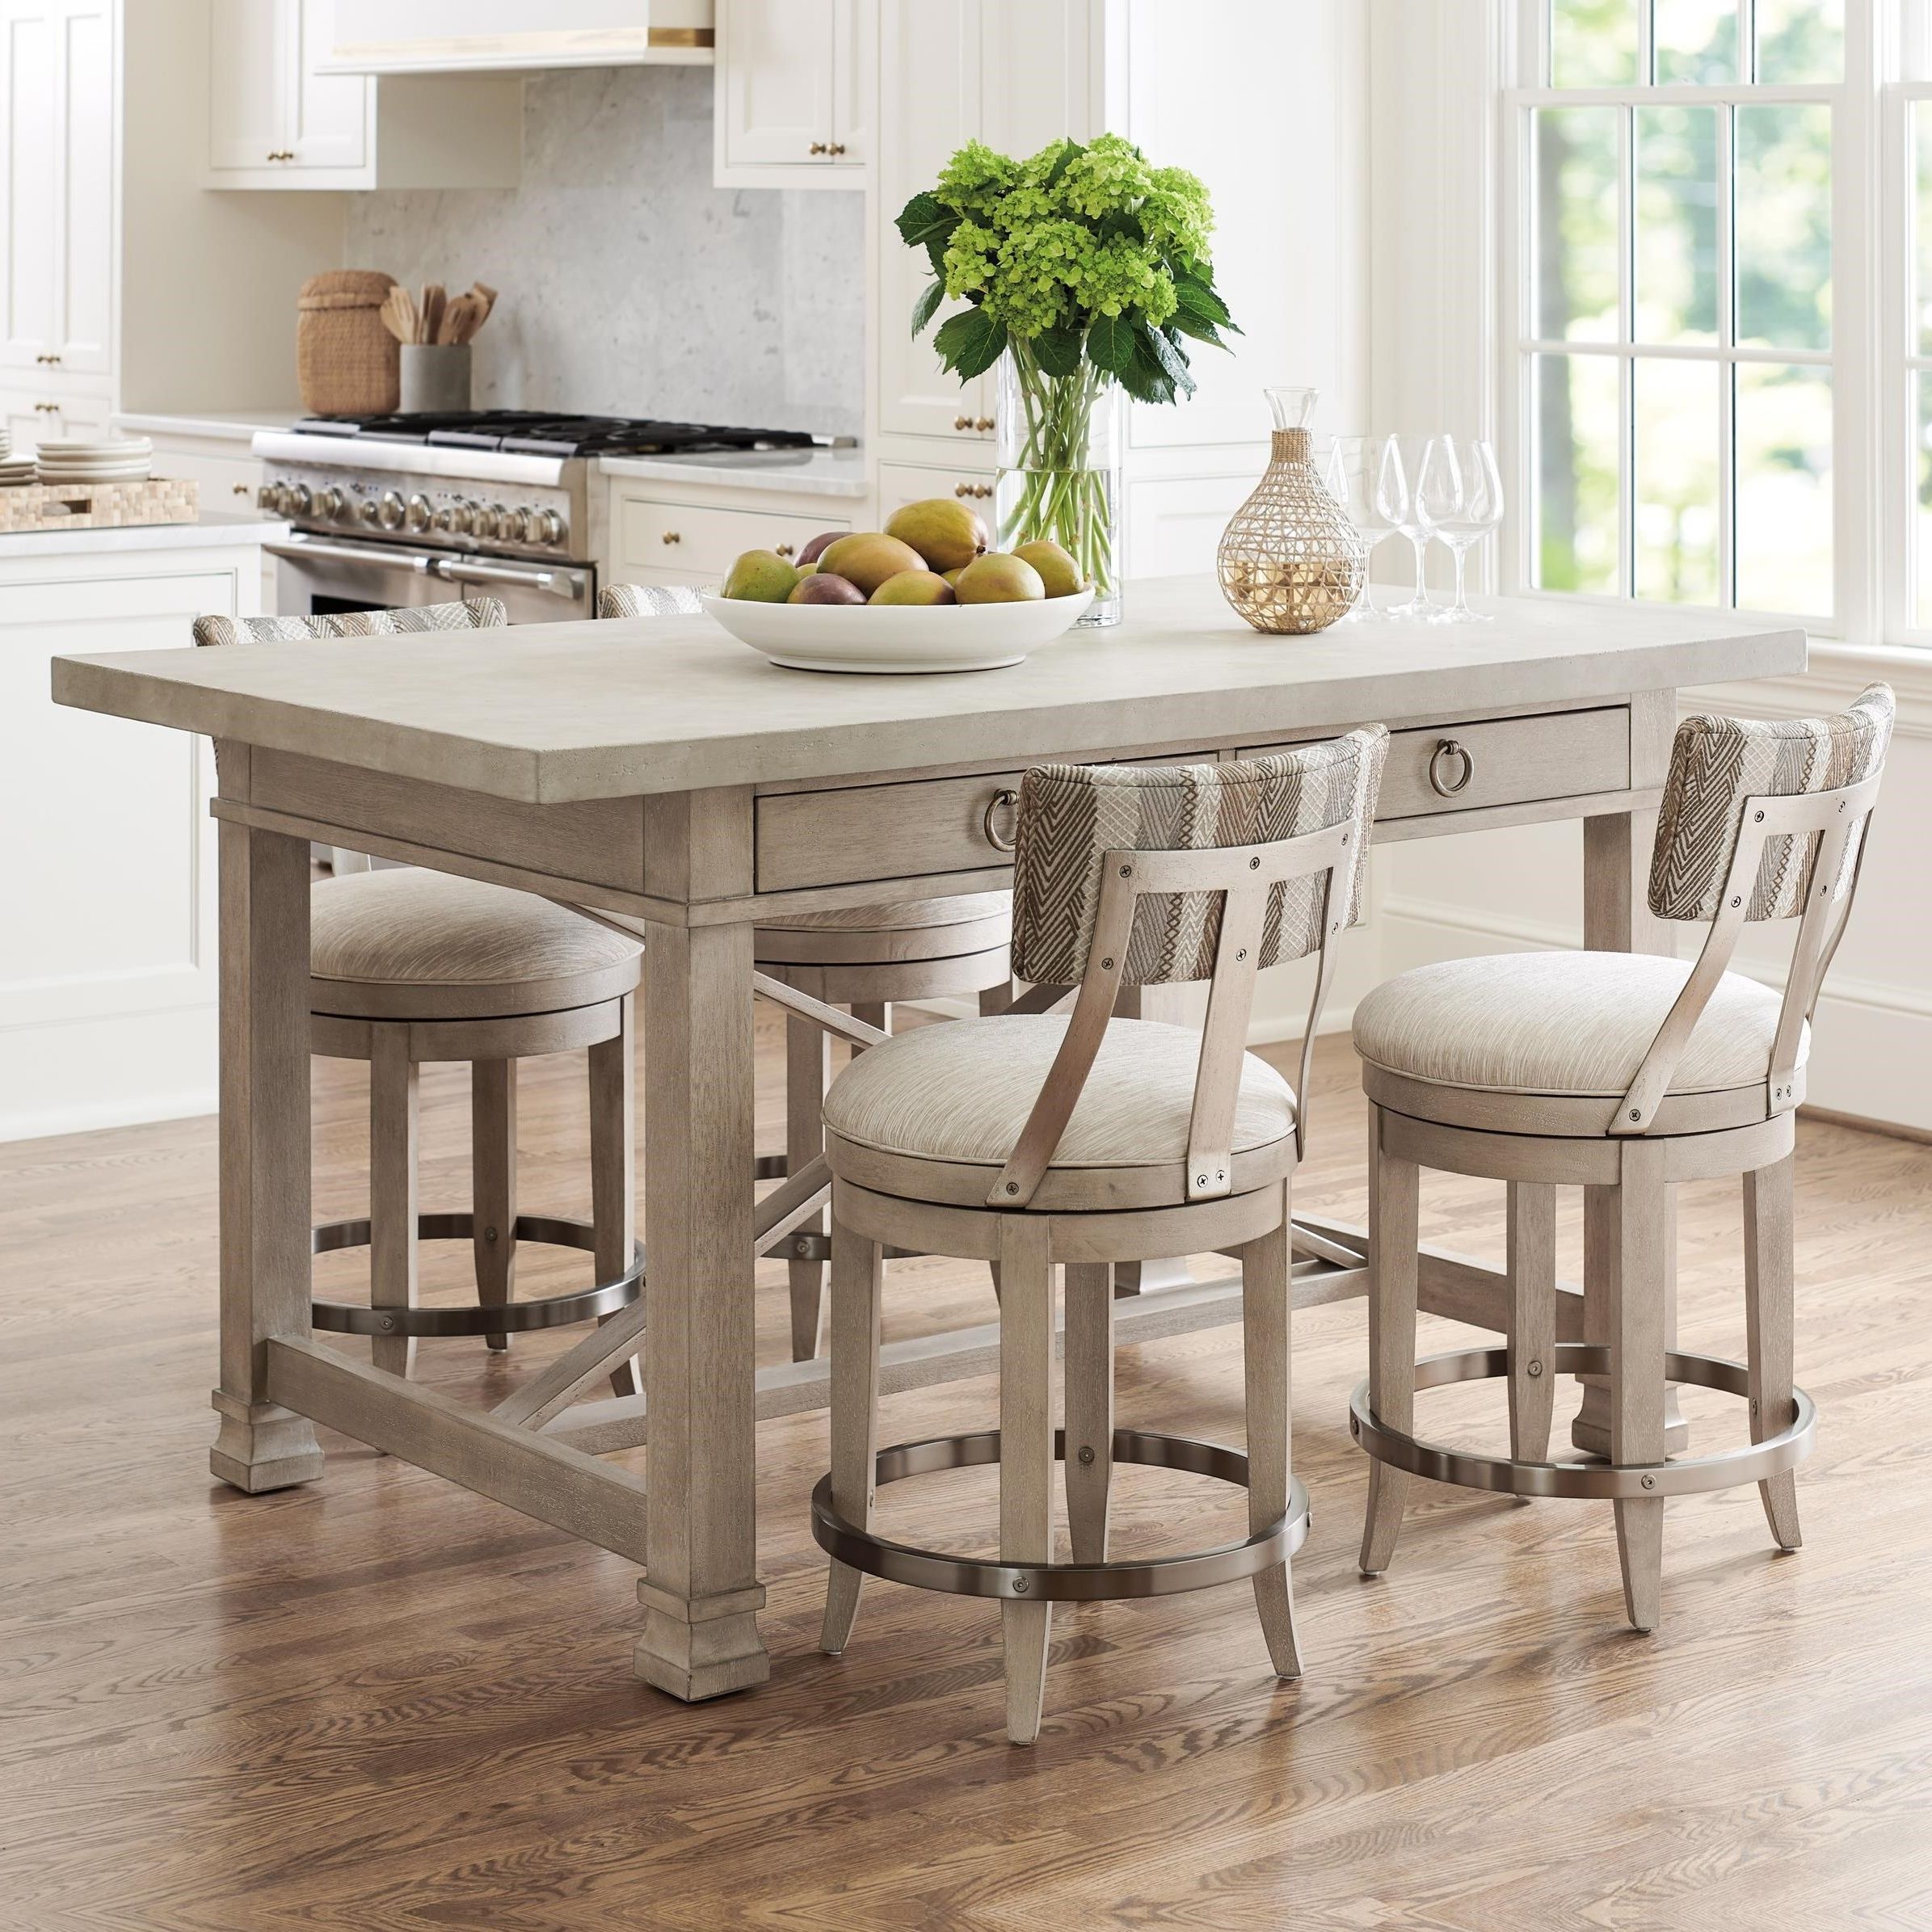 Abby Bar Height Dining Tables With Newest Barclay Butera Malibu 5 Piece Counter Height Pub Dining (View 18 of 20)